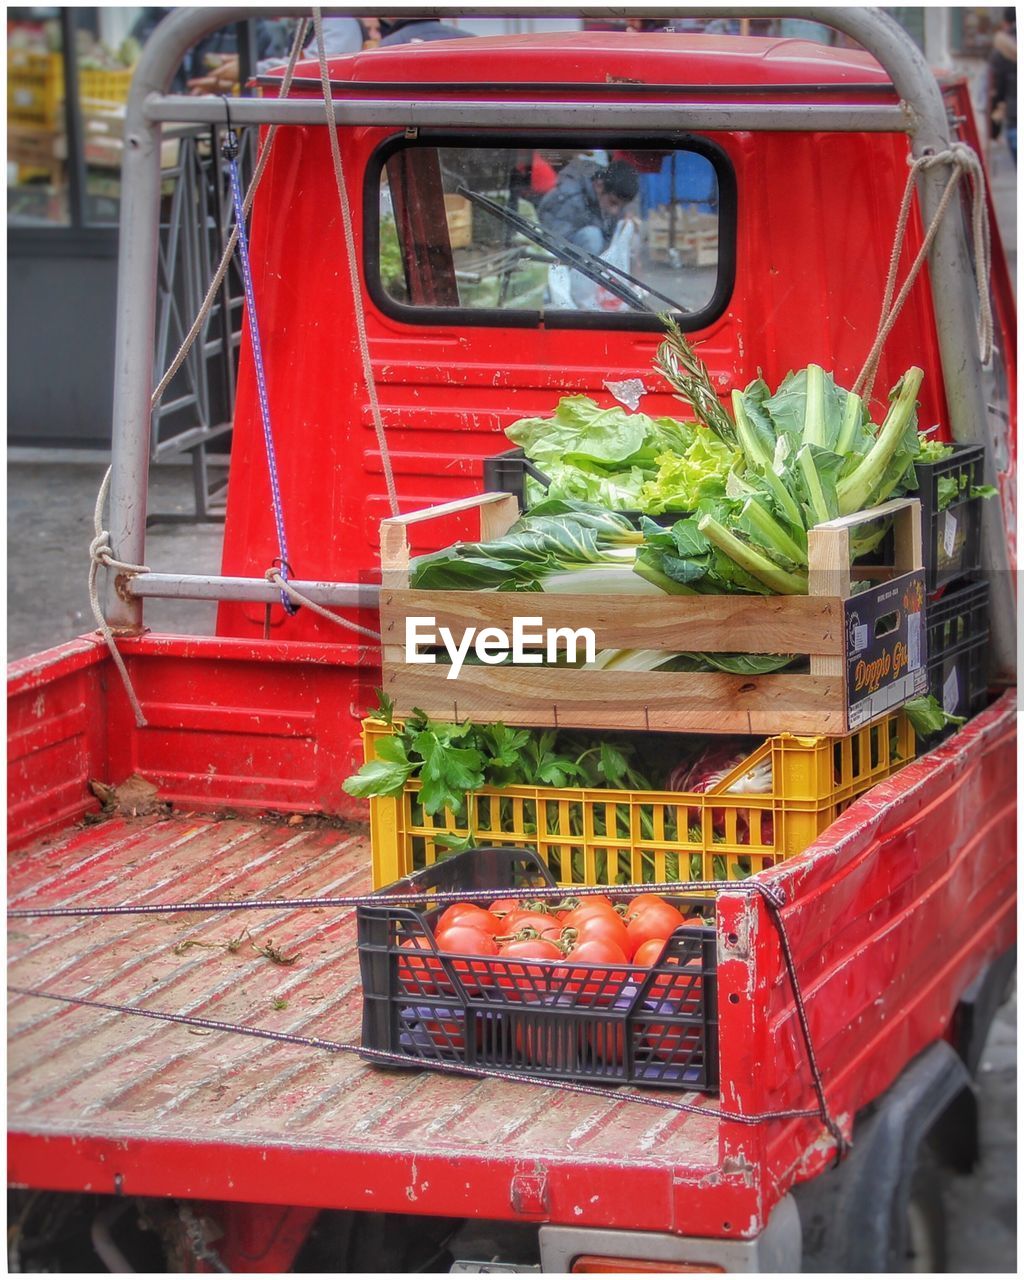 Vegetables in box on truck